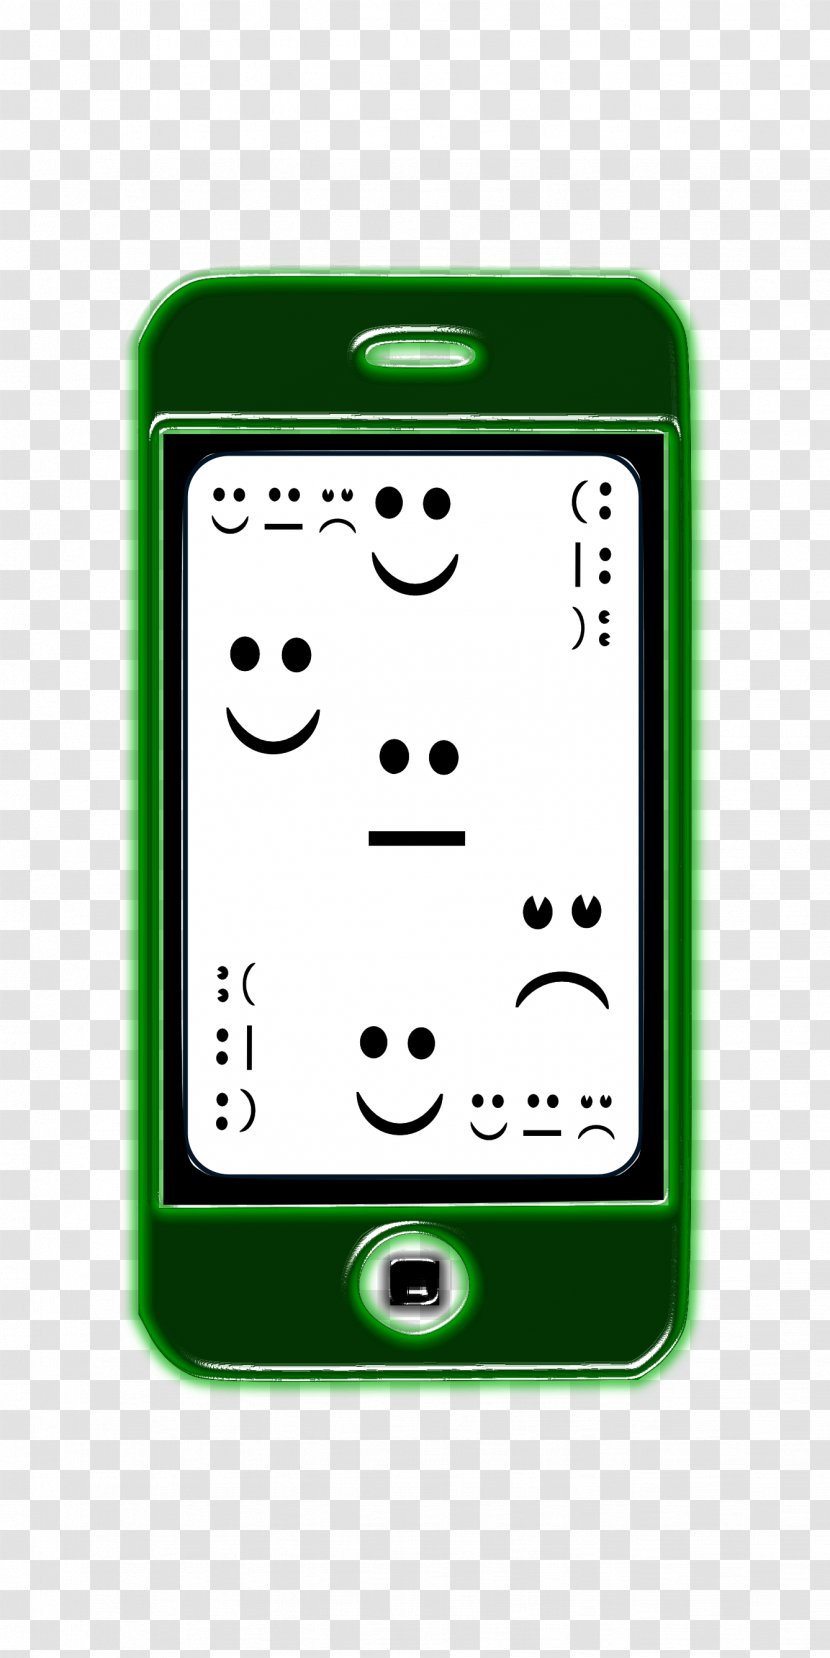 Software As A Service Mobile Phones Android - Green - Cell Phone Transparent PNG